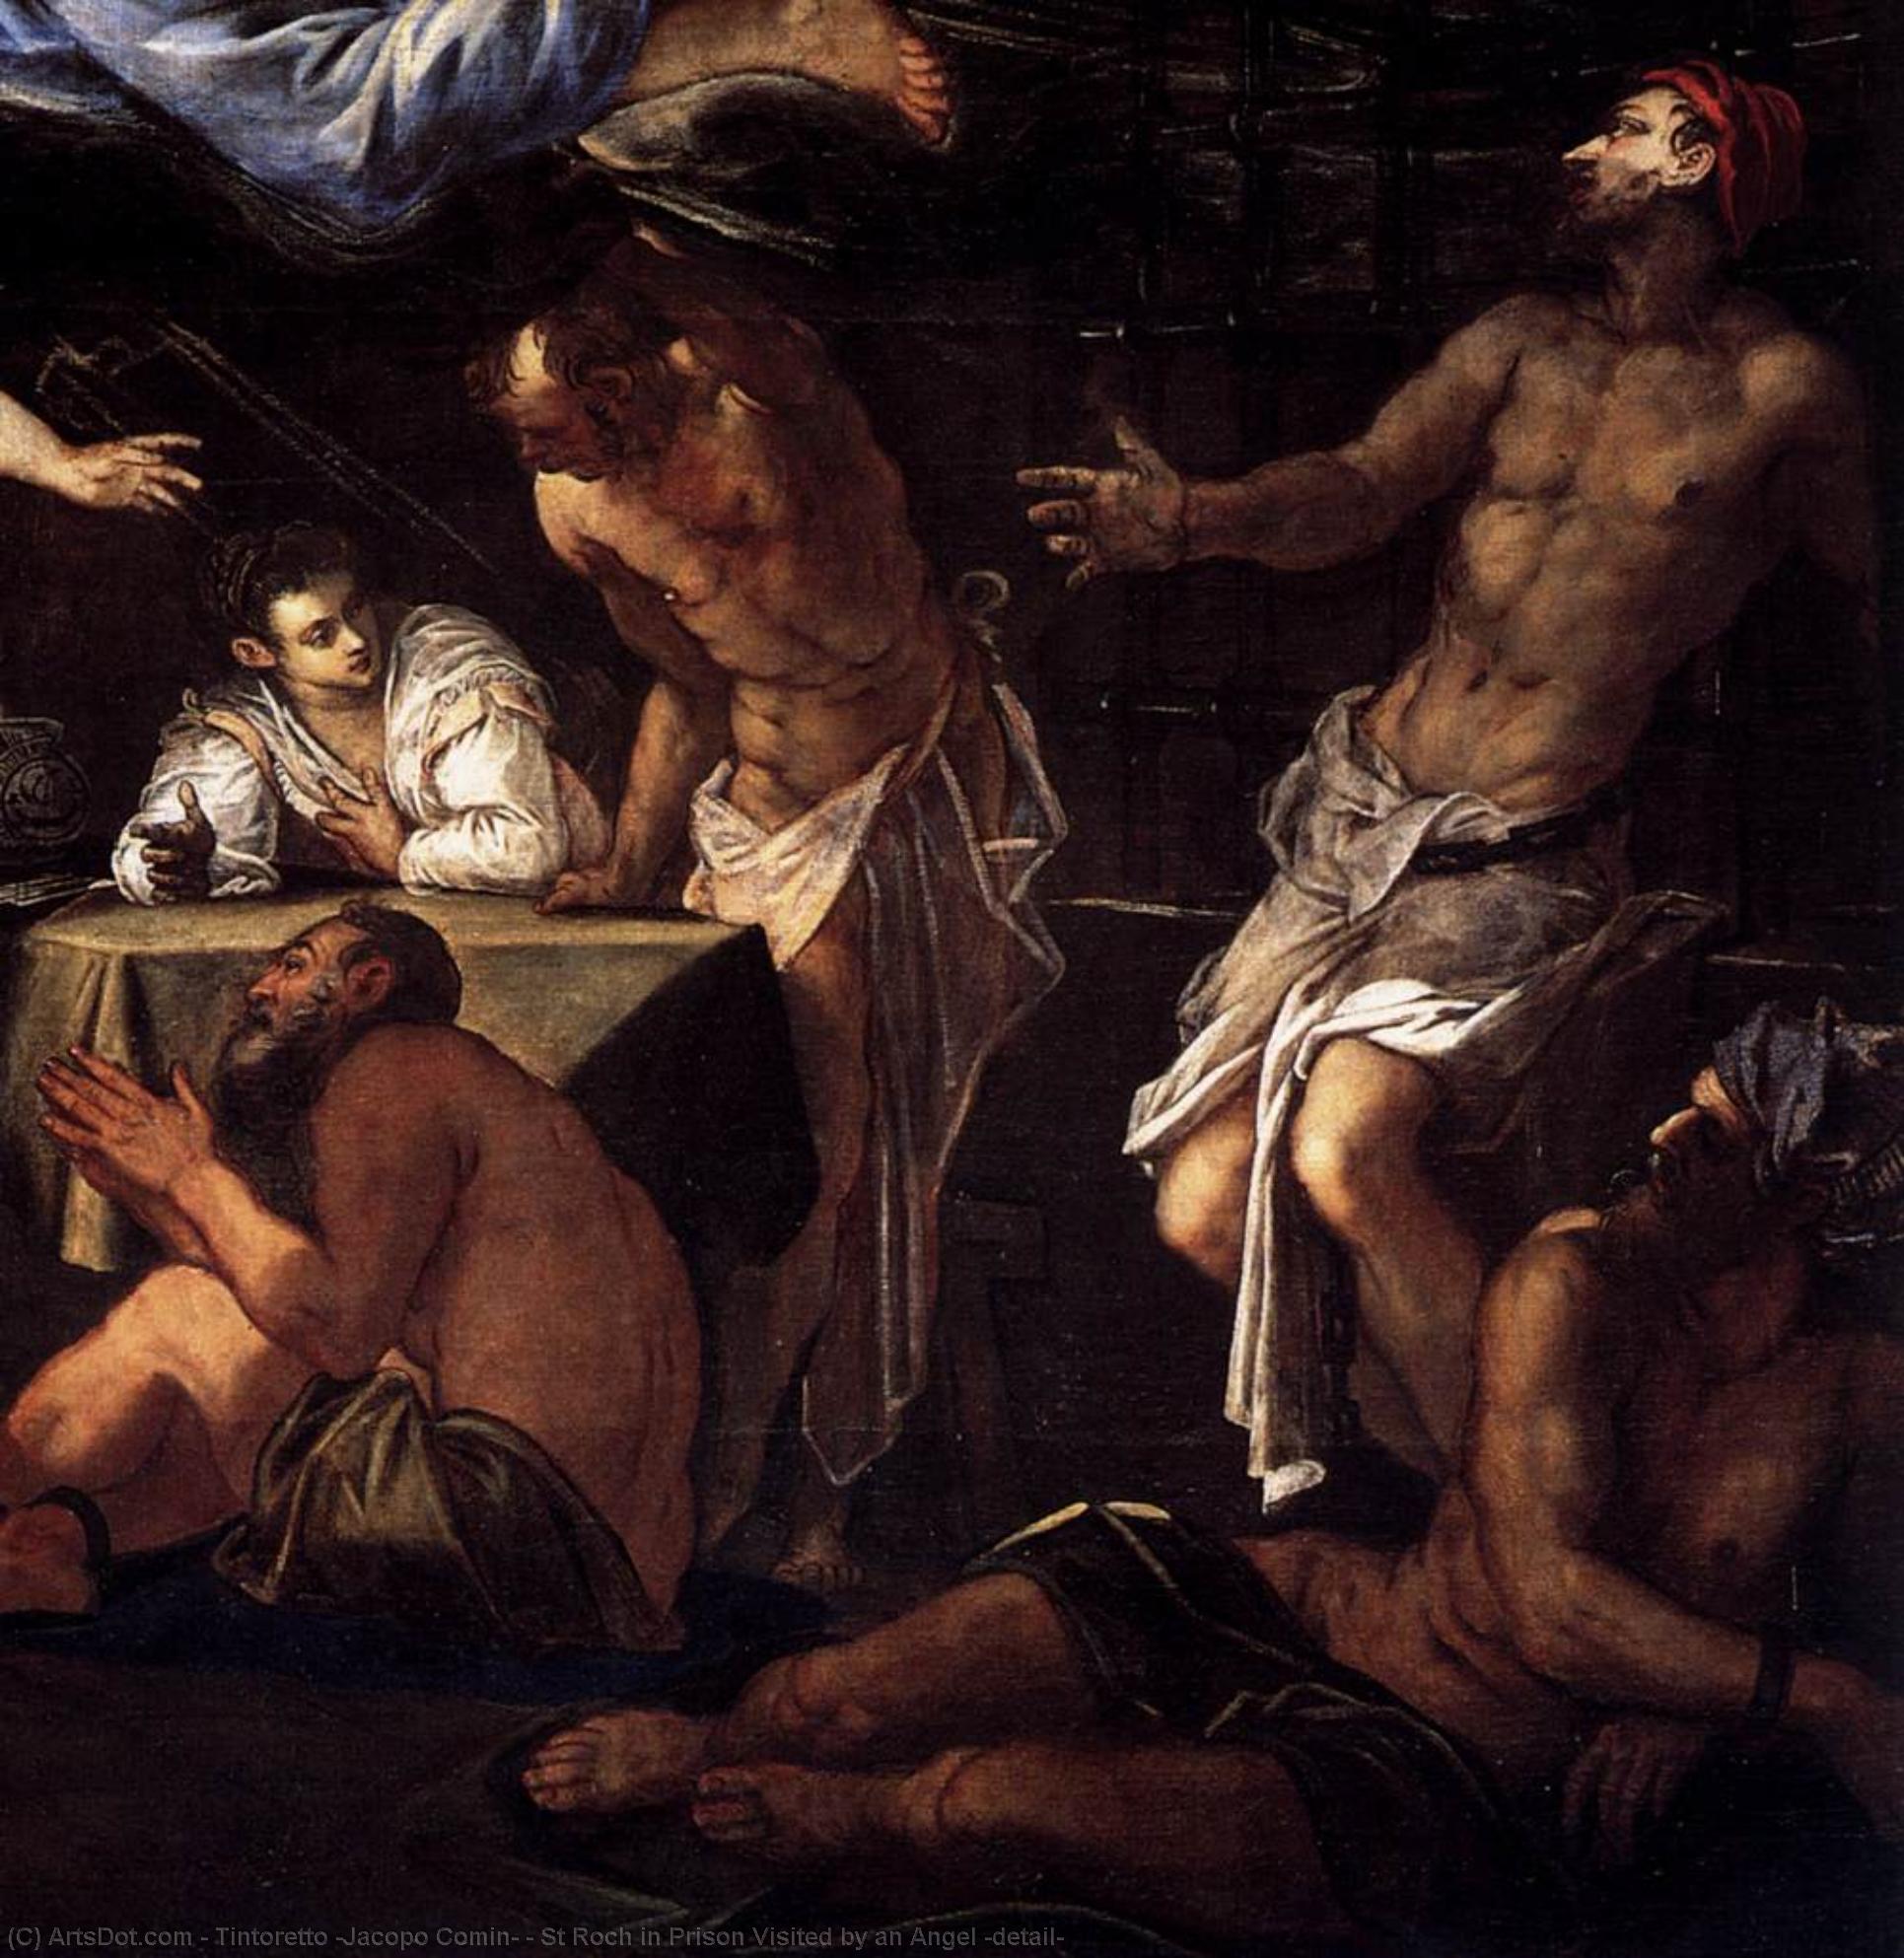 WikiOO.org - دایره المعارف هنرهای زیبا - نقاشی، آثار هنری Tintoretto (Jacopo Comin) - St Roch in Prison Visited by an Angel (detail)